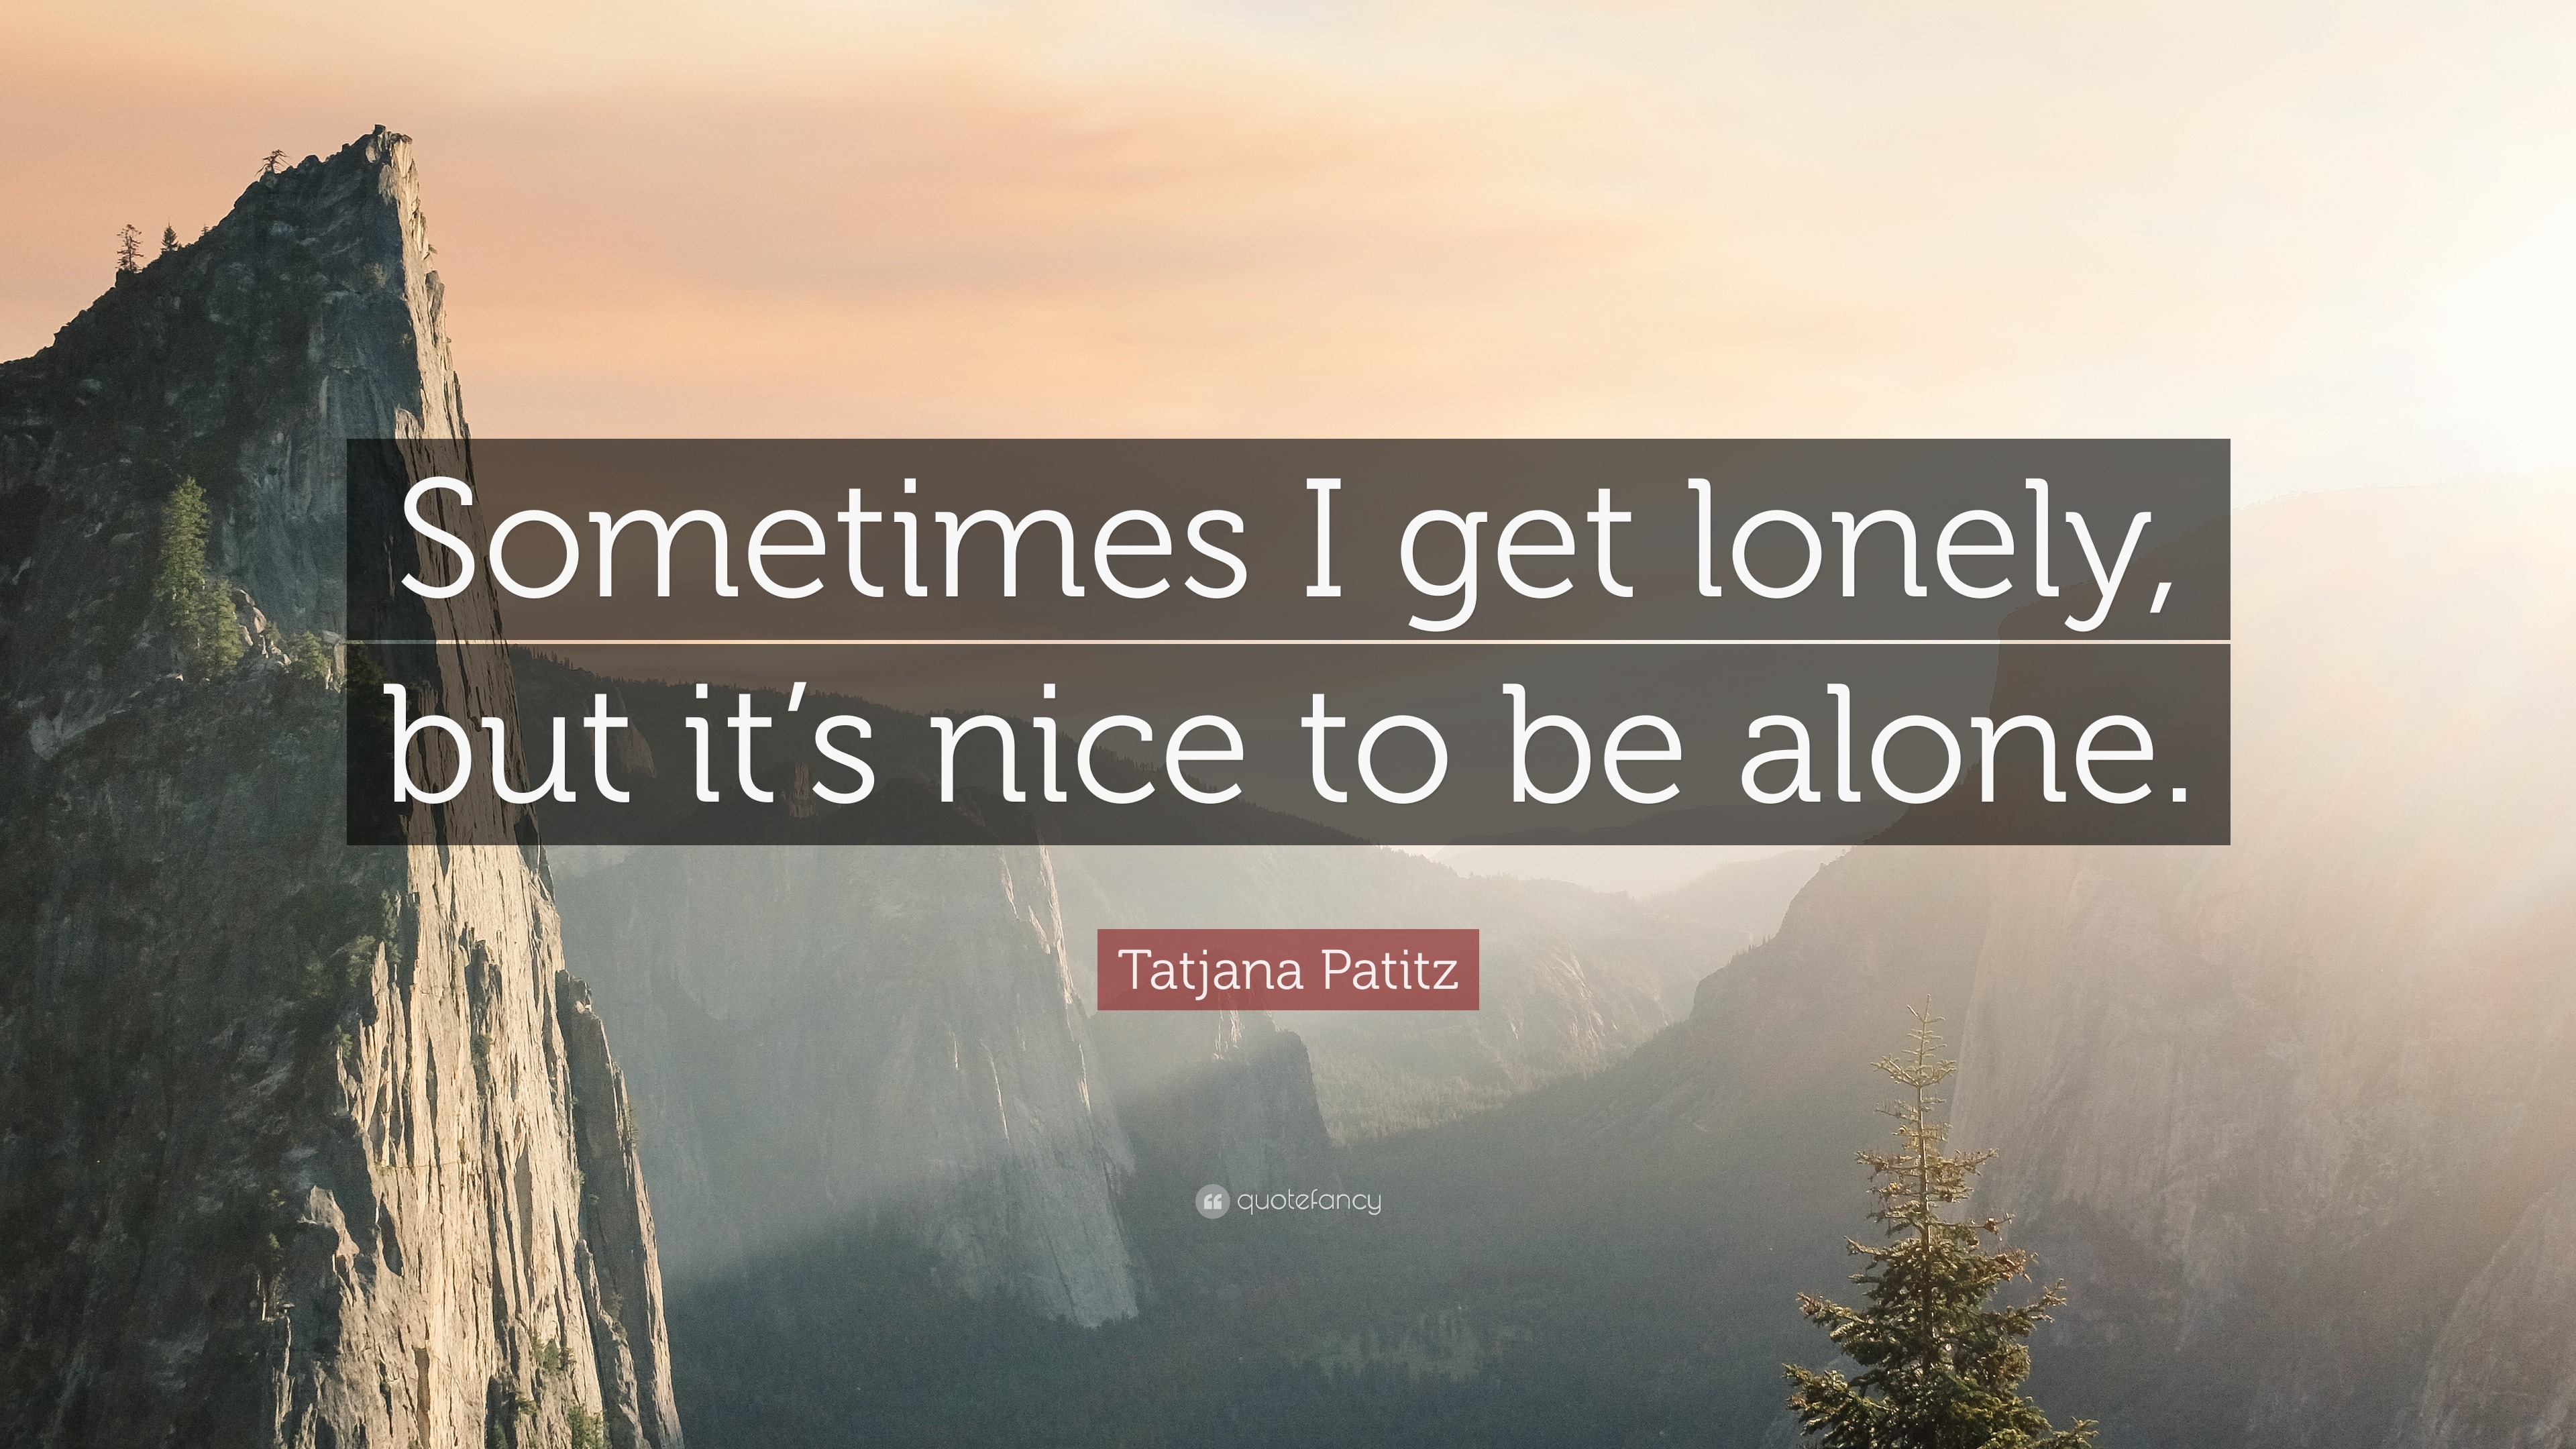 Tatjana Patitz Quote: “Sometimes I get lonely, but it’s nice to be alone.”